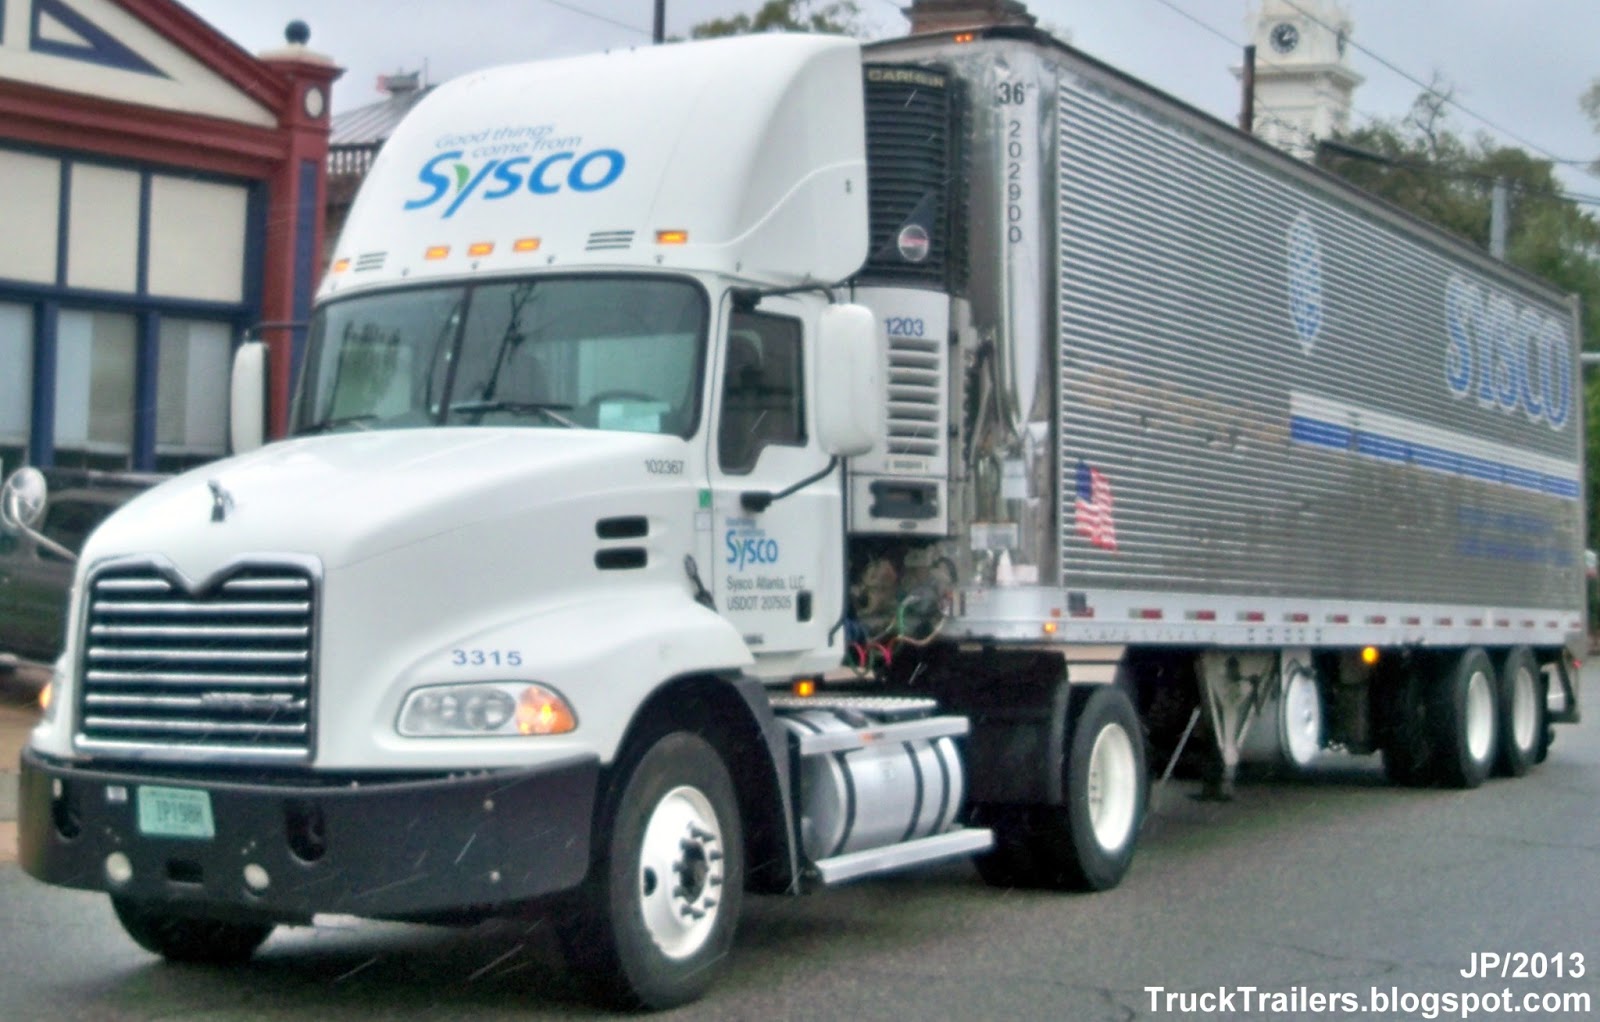 Where can you find Sysco truck driver jobs?